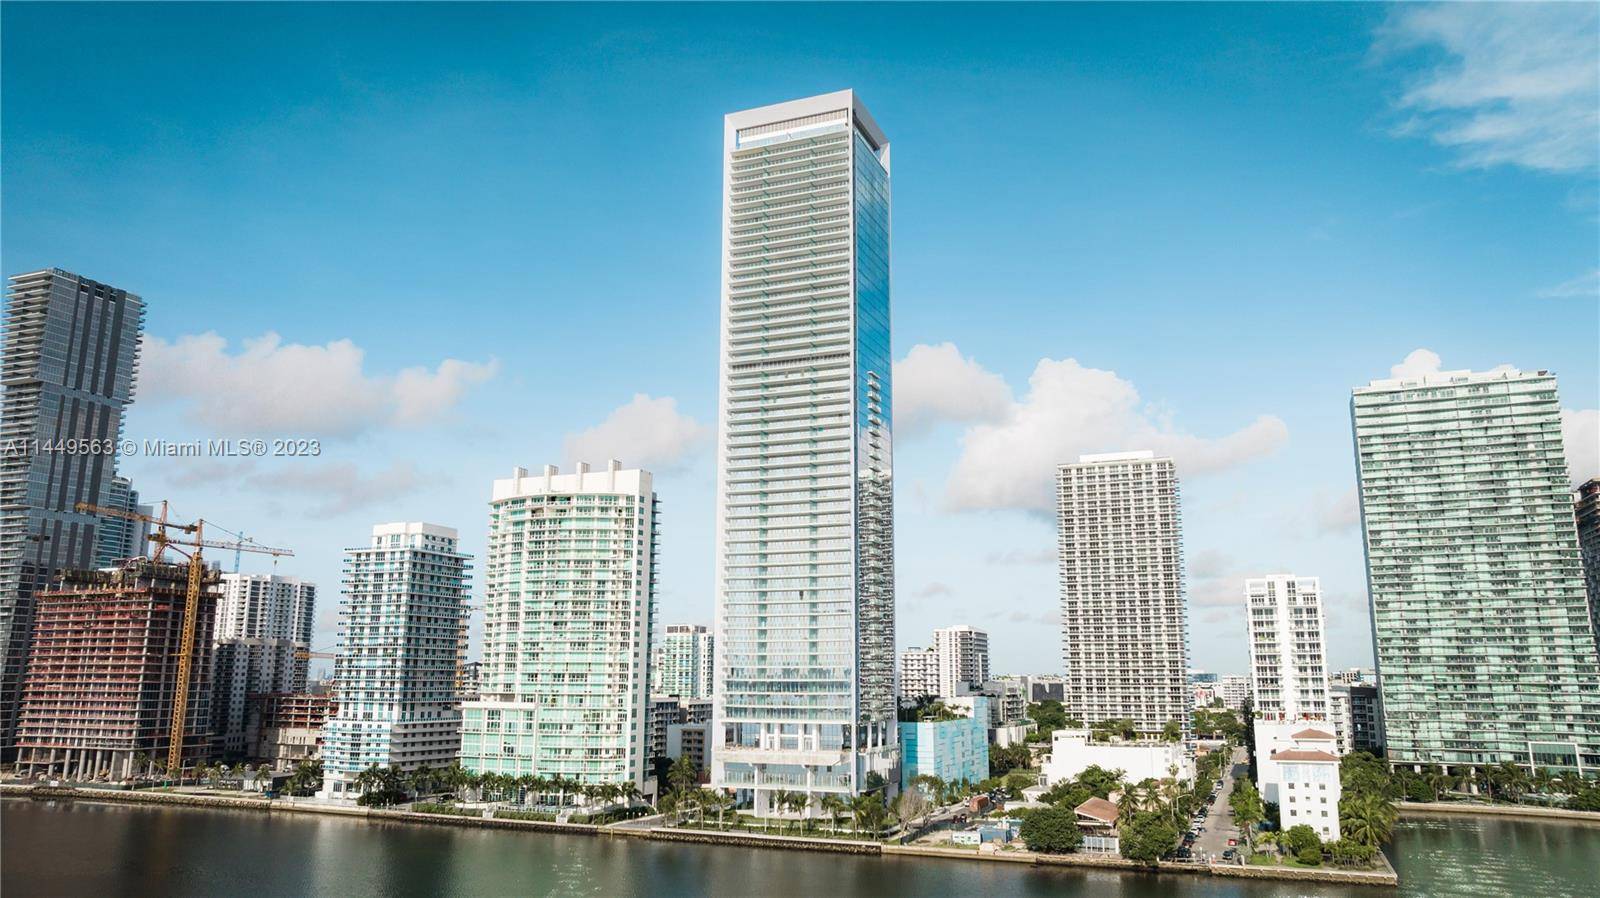 NEW ! Welcome to MISSONI Baia's largest unit with 270 degree views and a flow through floorplan east to west.